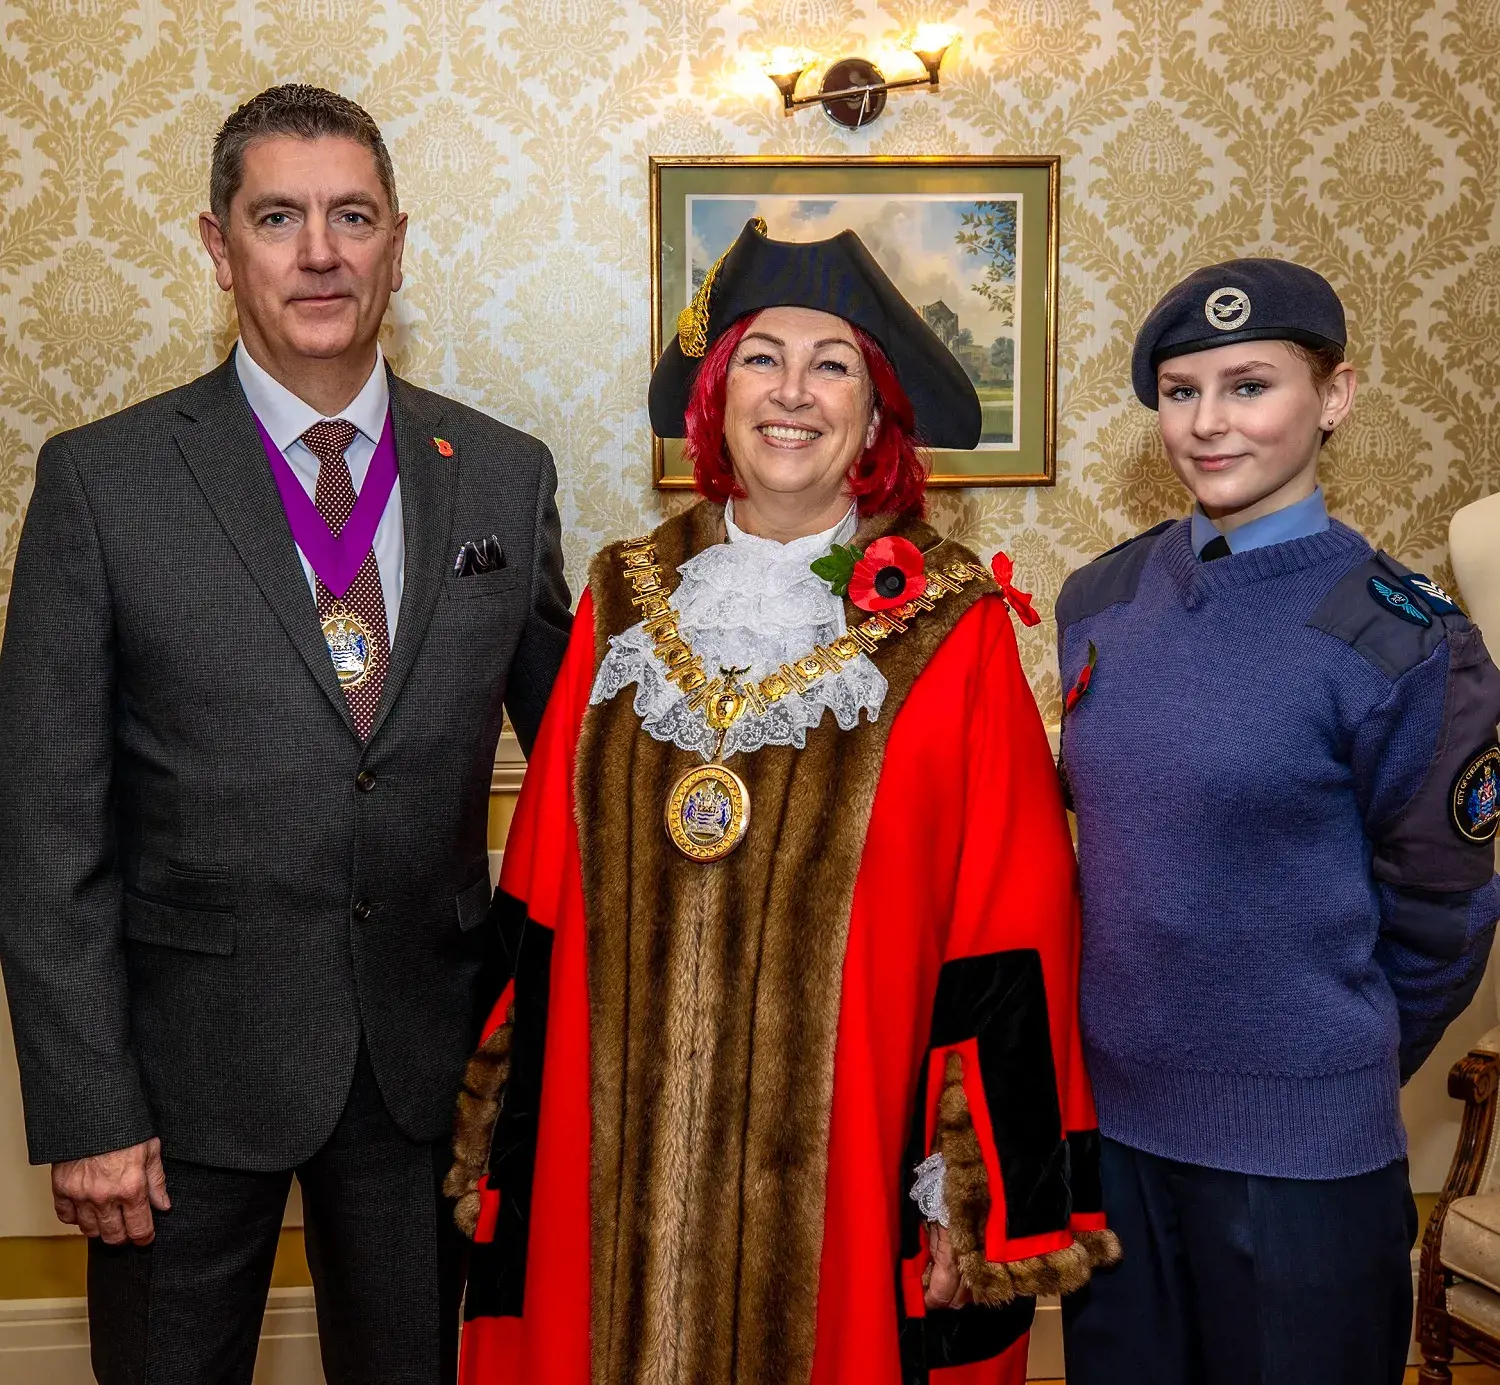 The mayor's consort, the mayor and an air cadet